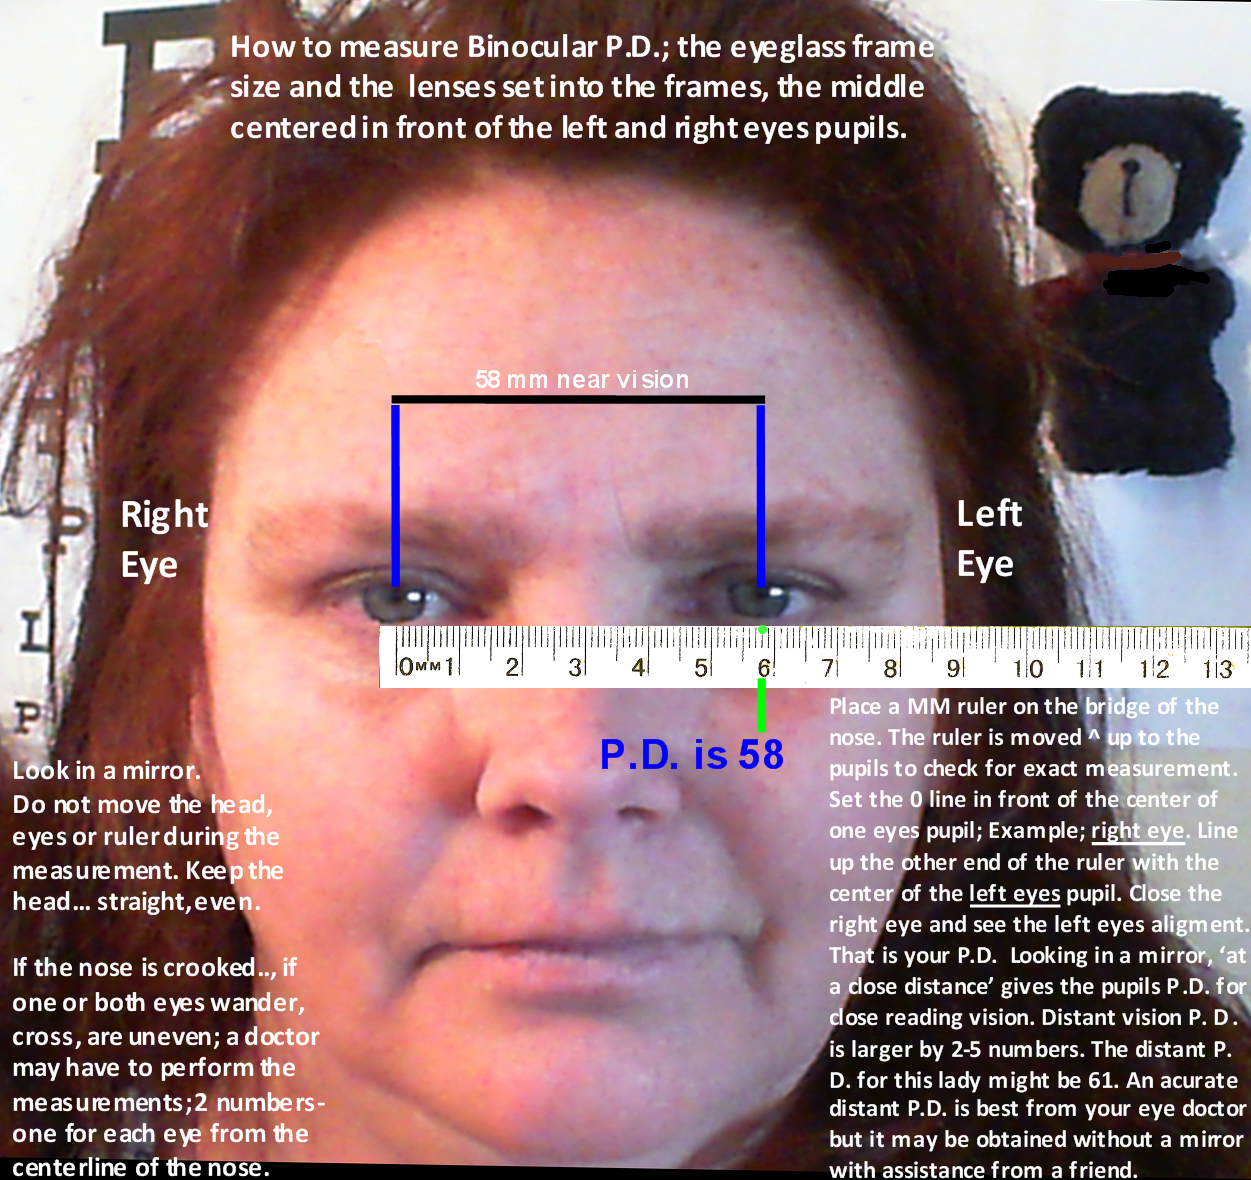 P.D. Measurement example for ordering at Zenni-Optical or other Opticians